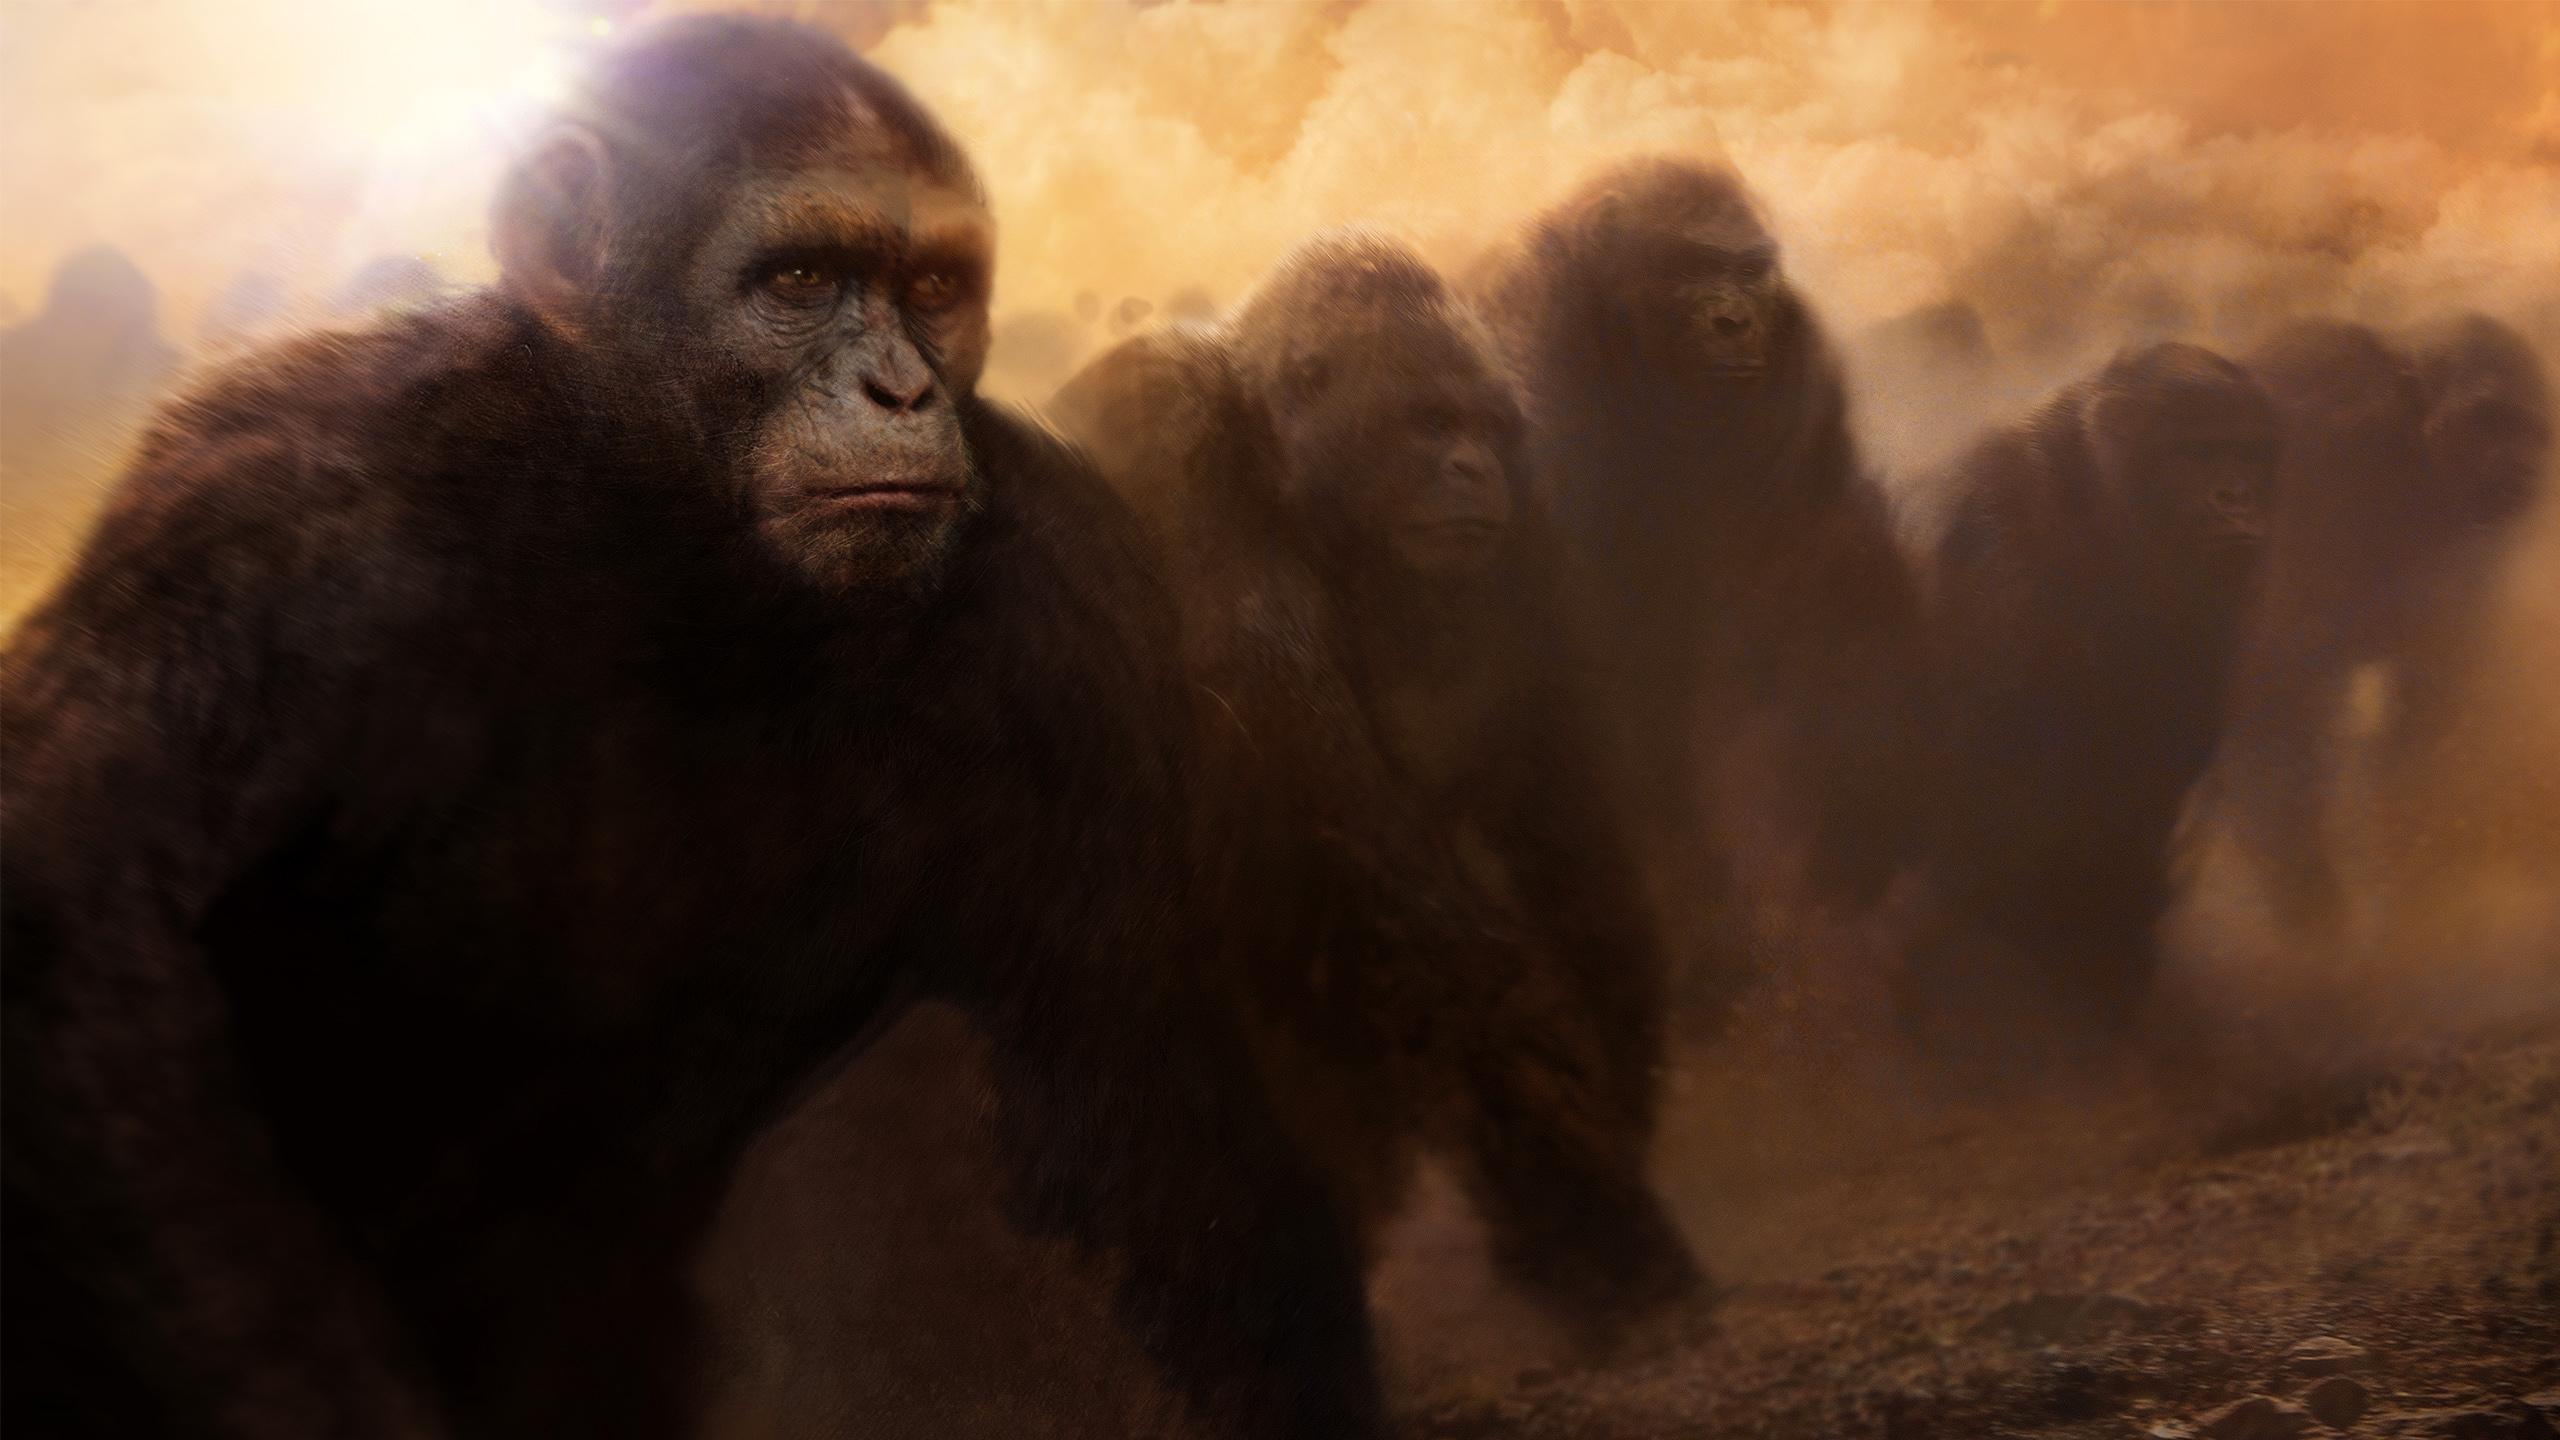 Rise Of The Planet Of The Apes Wallpapers Hd Download - Apes Alone Weak Apes Together Strong - HD Wallpaper 